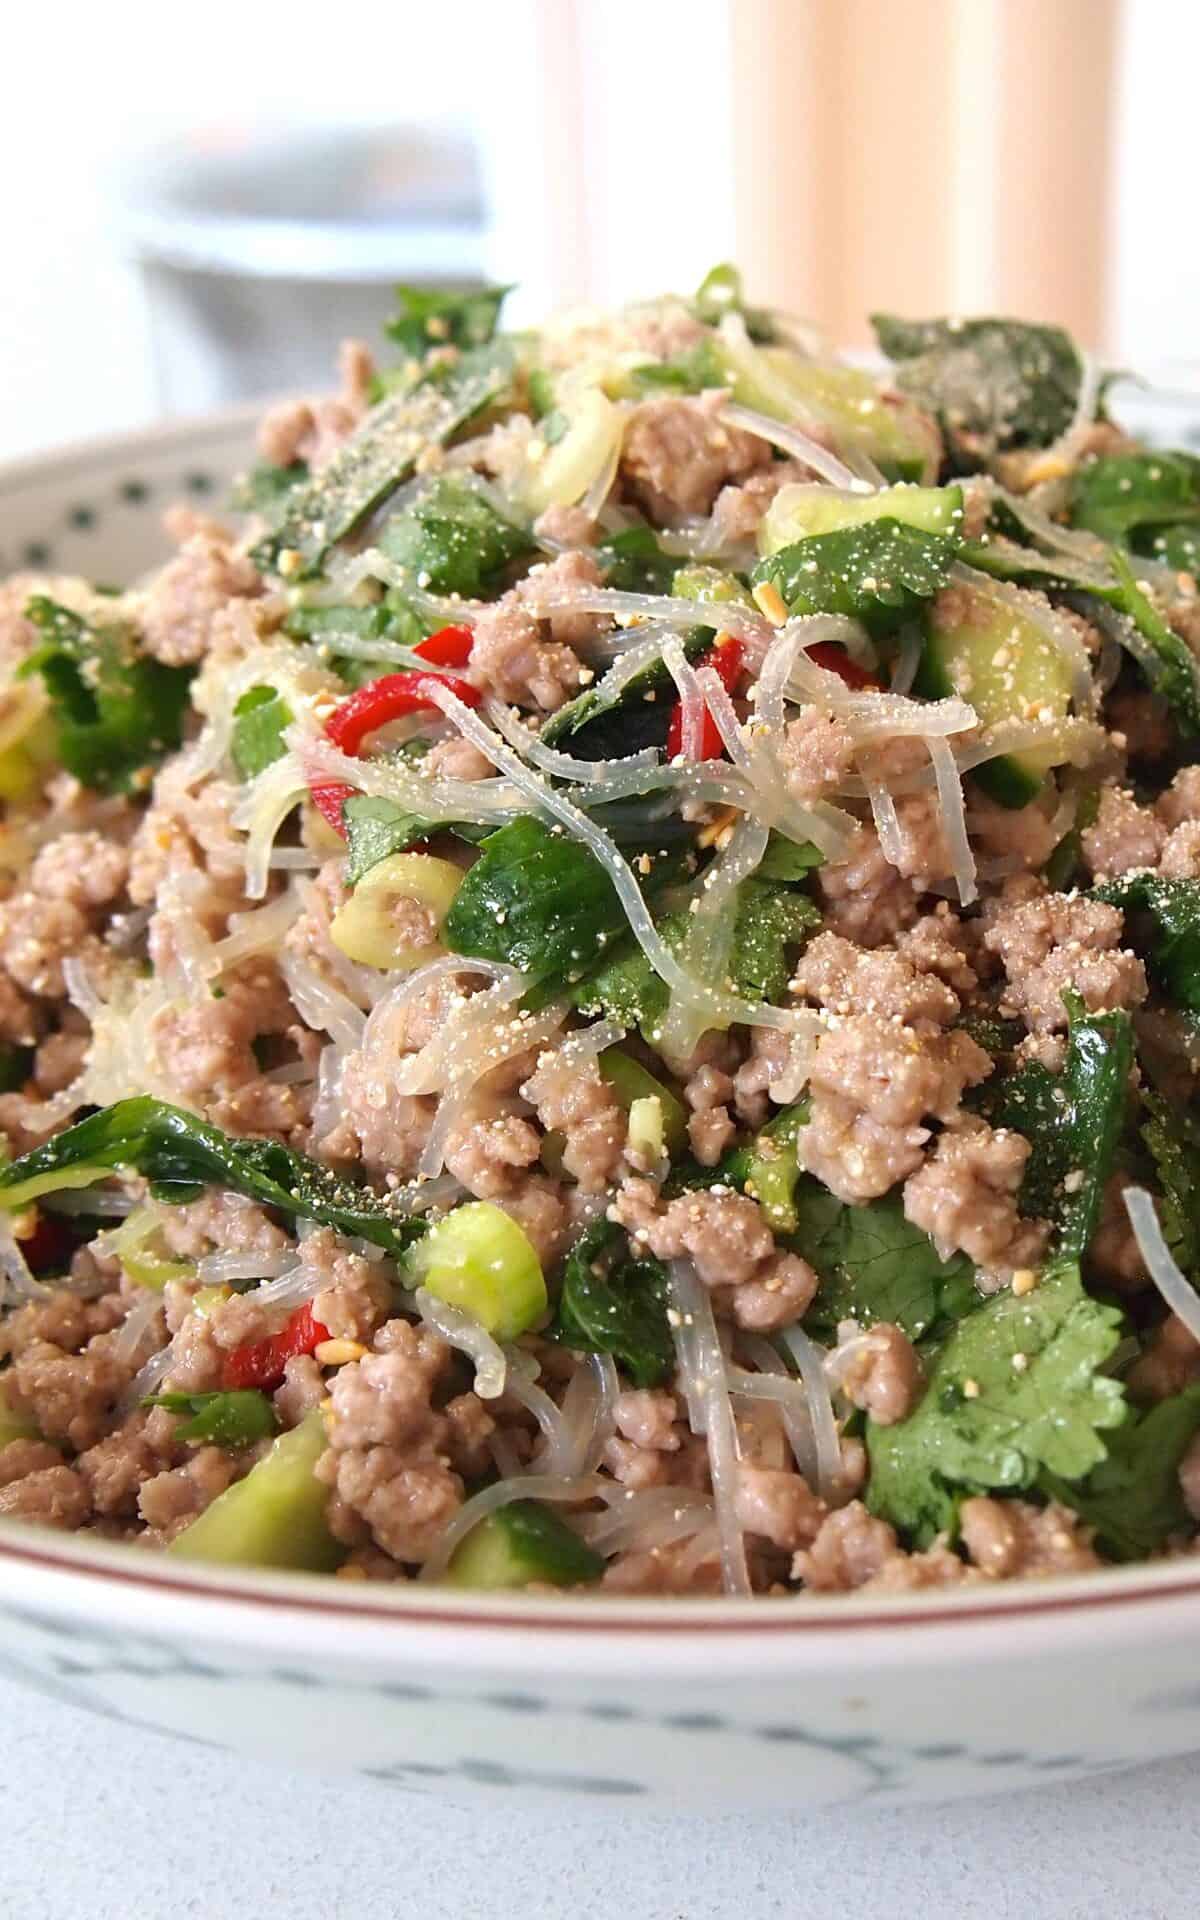  A splash of color and flavor in every bite with this vibrant larb salad.